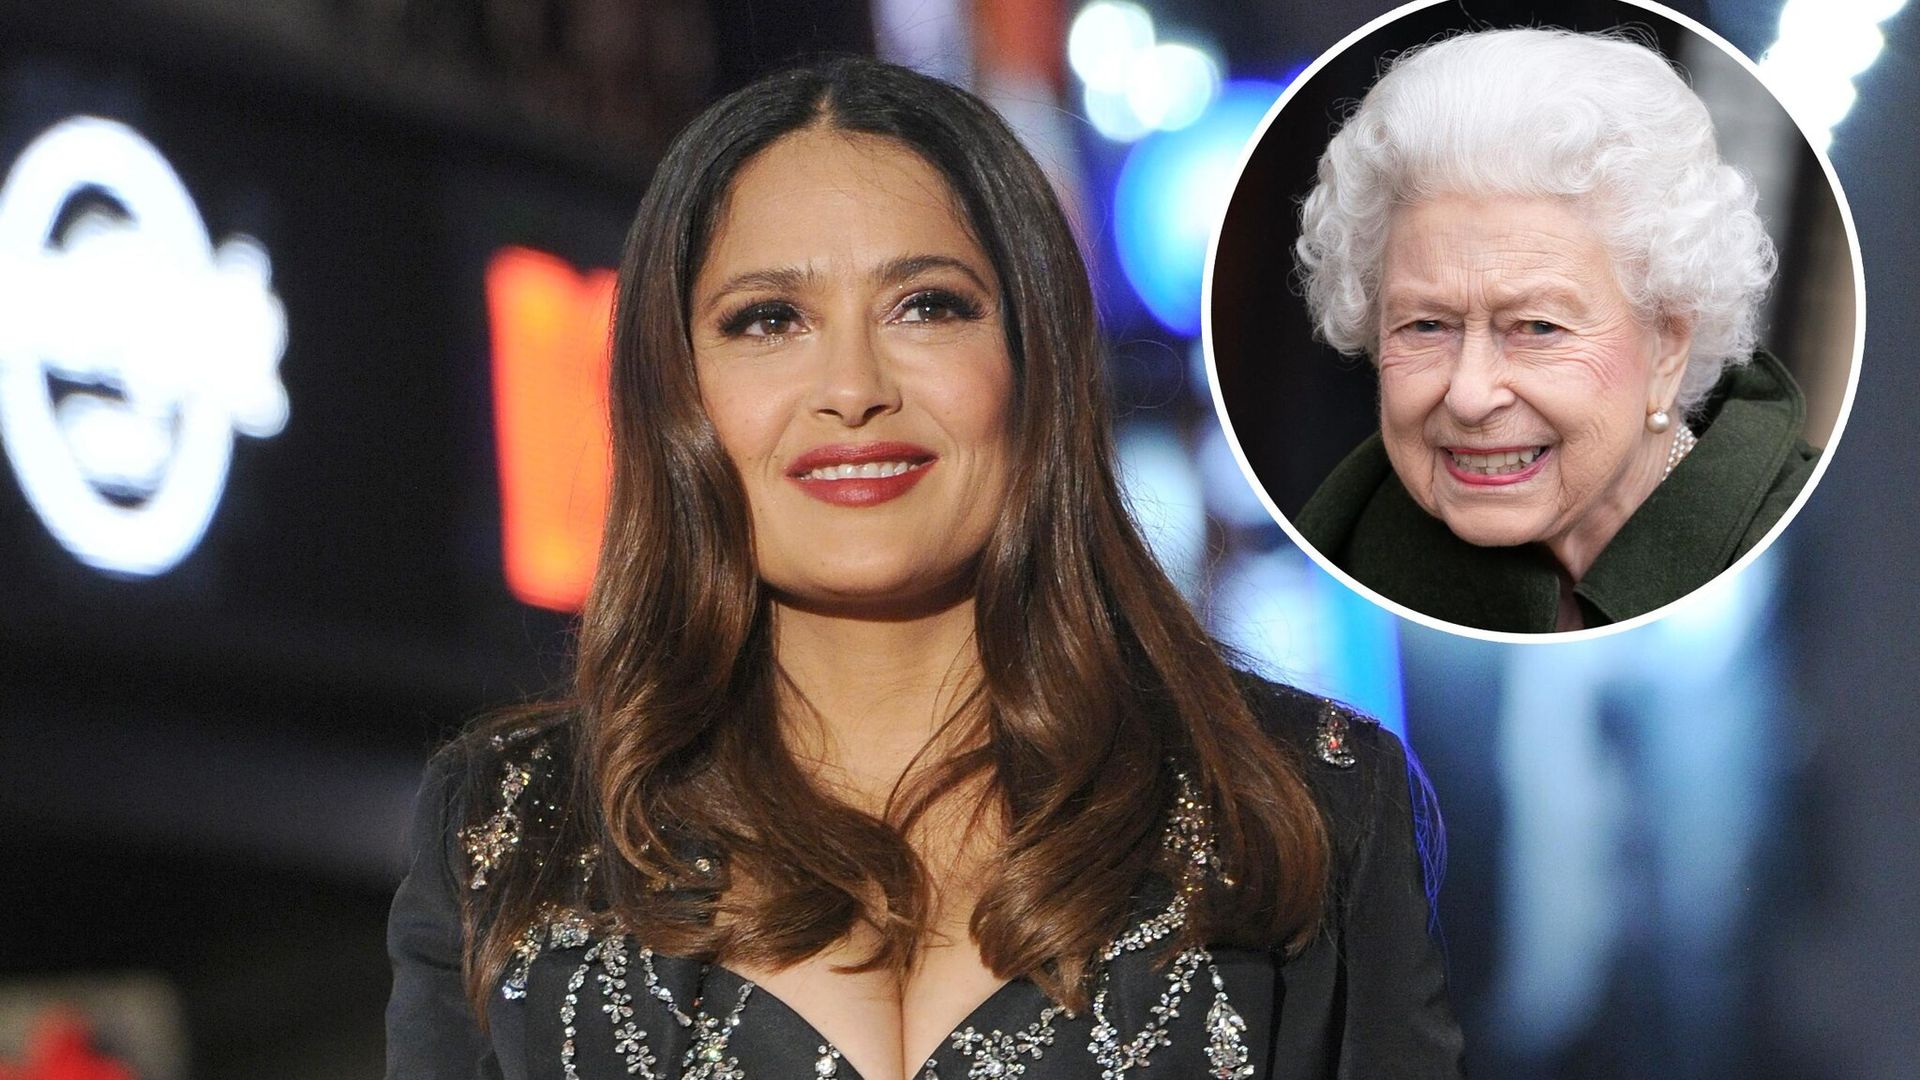 salma hayek wishes queen elizabeth swift recovery from covid 19